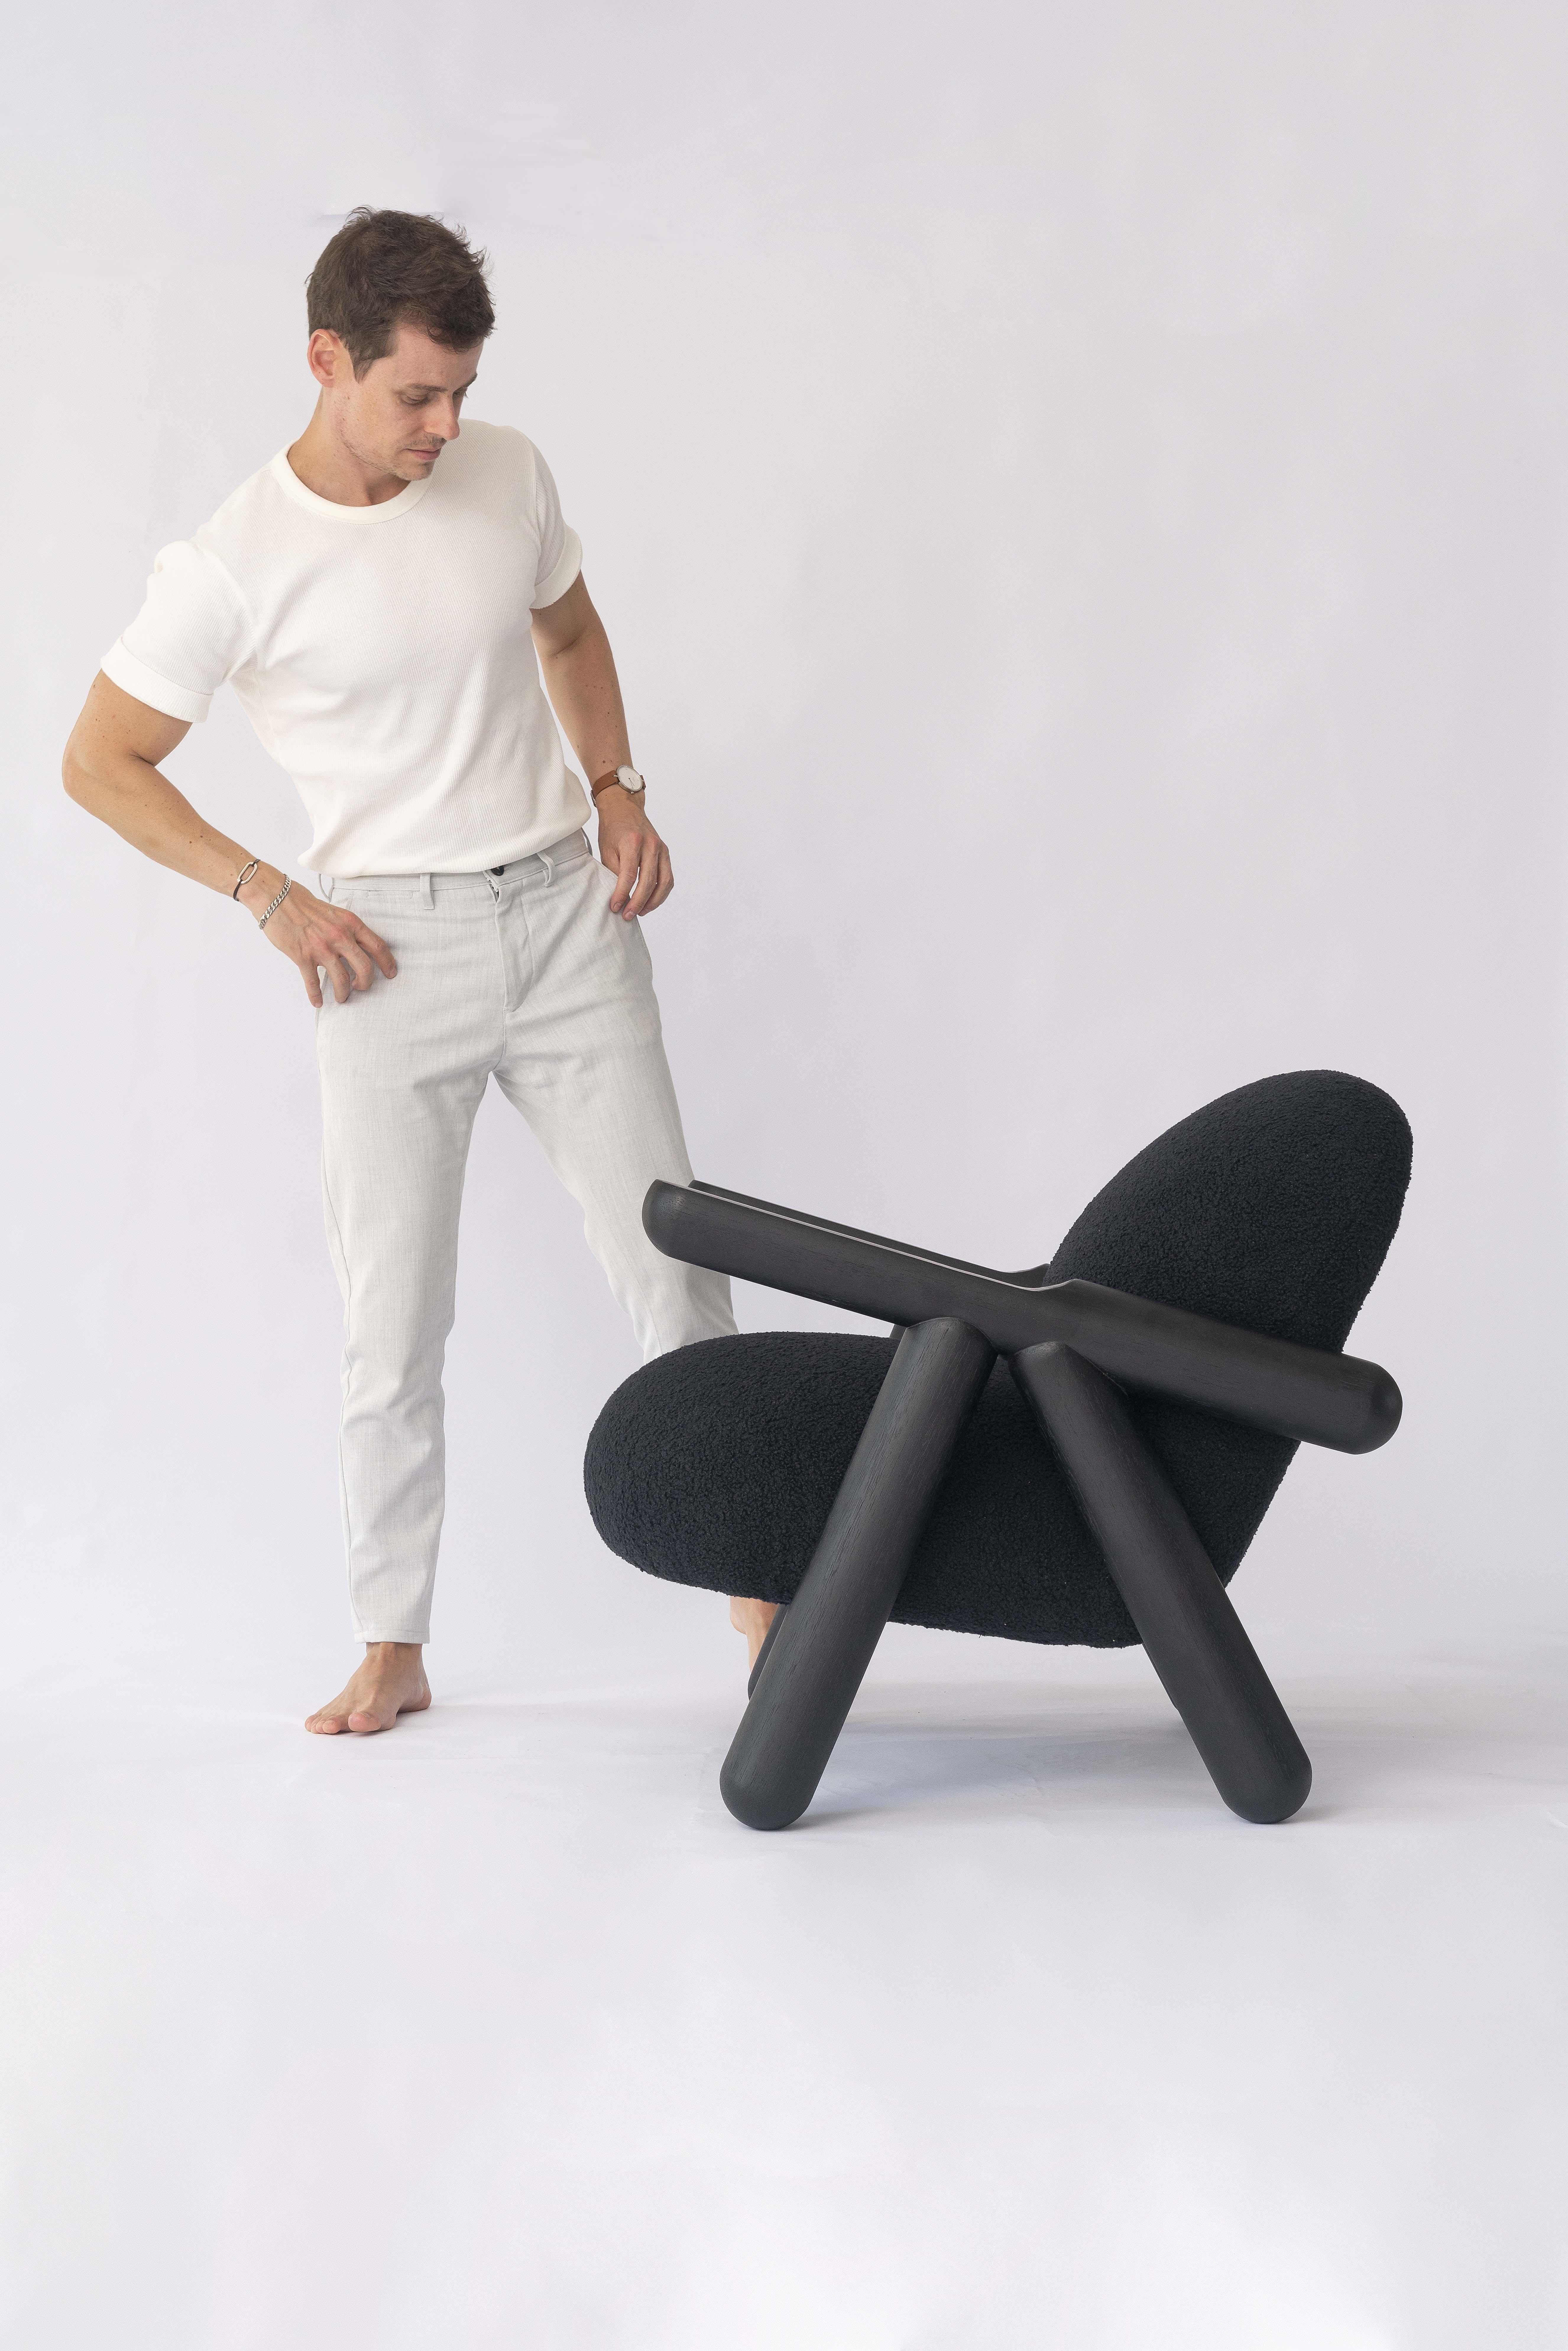 All Black Fartura Armchair in Neotenic Style by Tiago Curioni For Sale 4